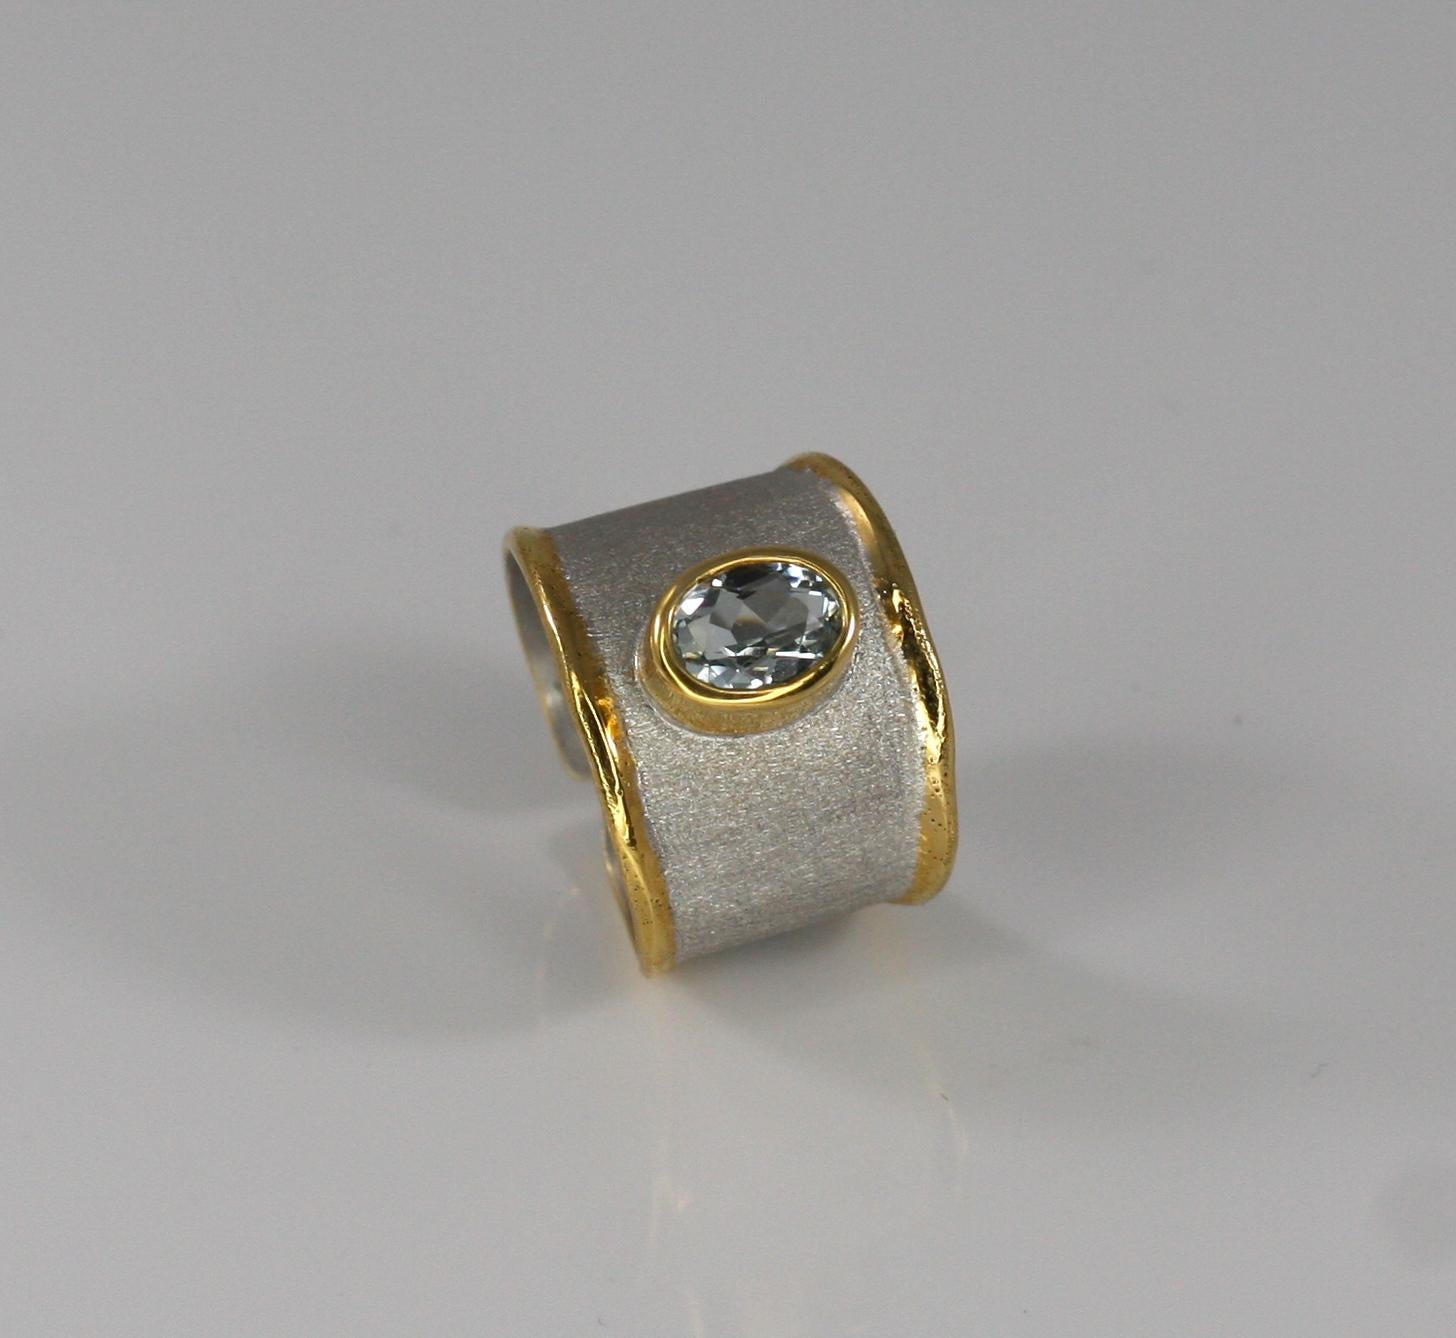 This is Yianni Creations ring with oval-shaped 1.10 Carat Aquamarine crafted from fine silver 950 purity and plated with palladium to protect the ring from the elements. The unique look is completed by special shiny velvet background together with